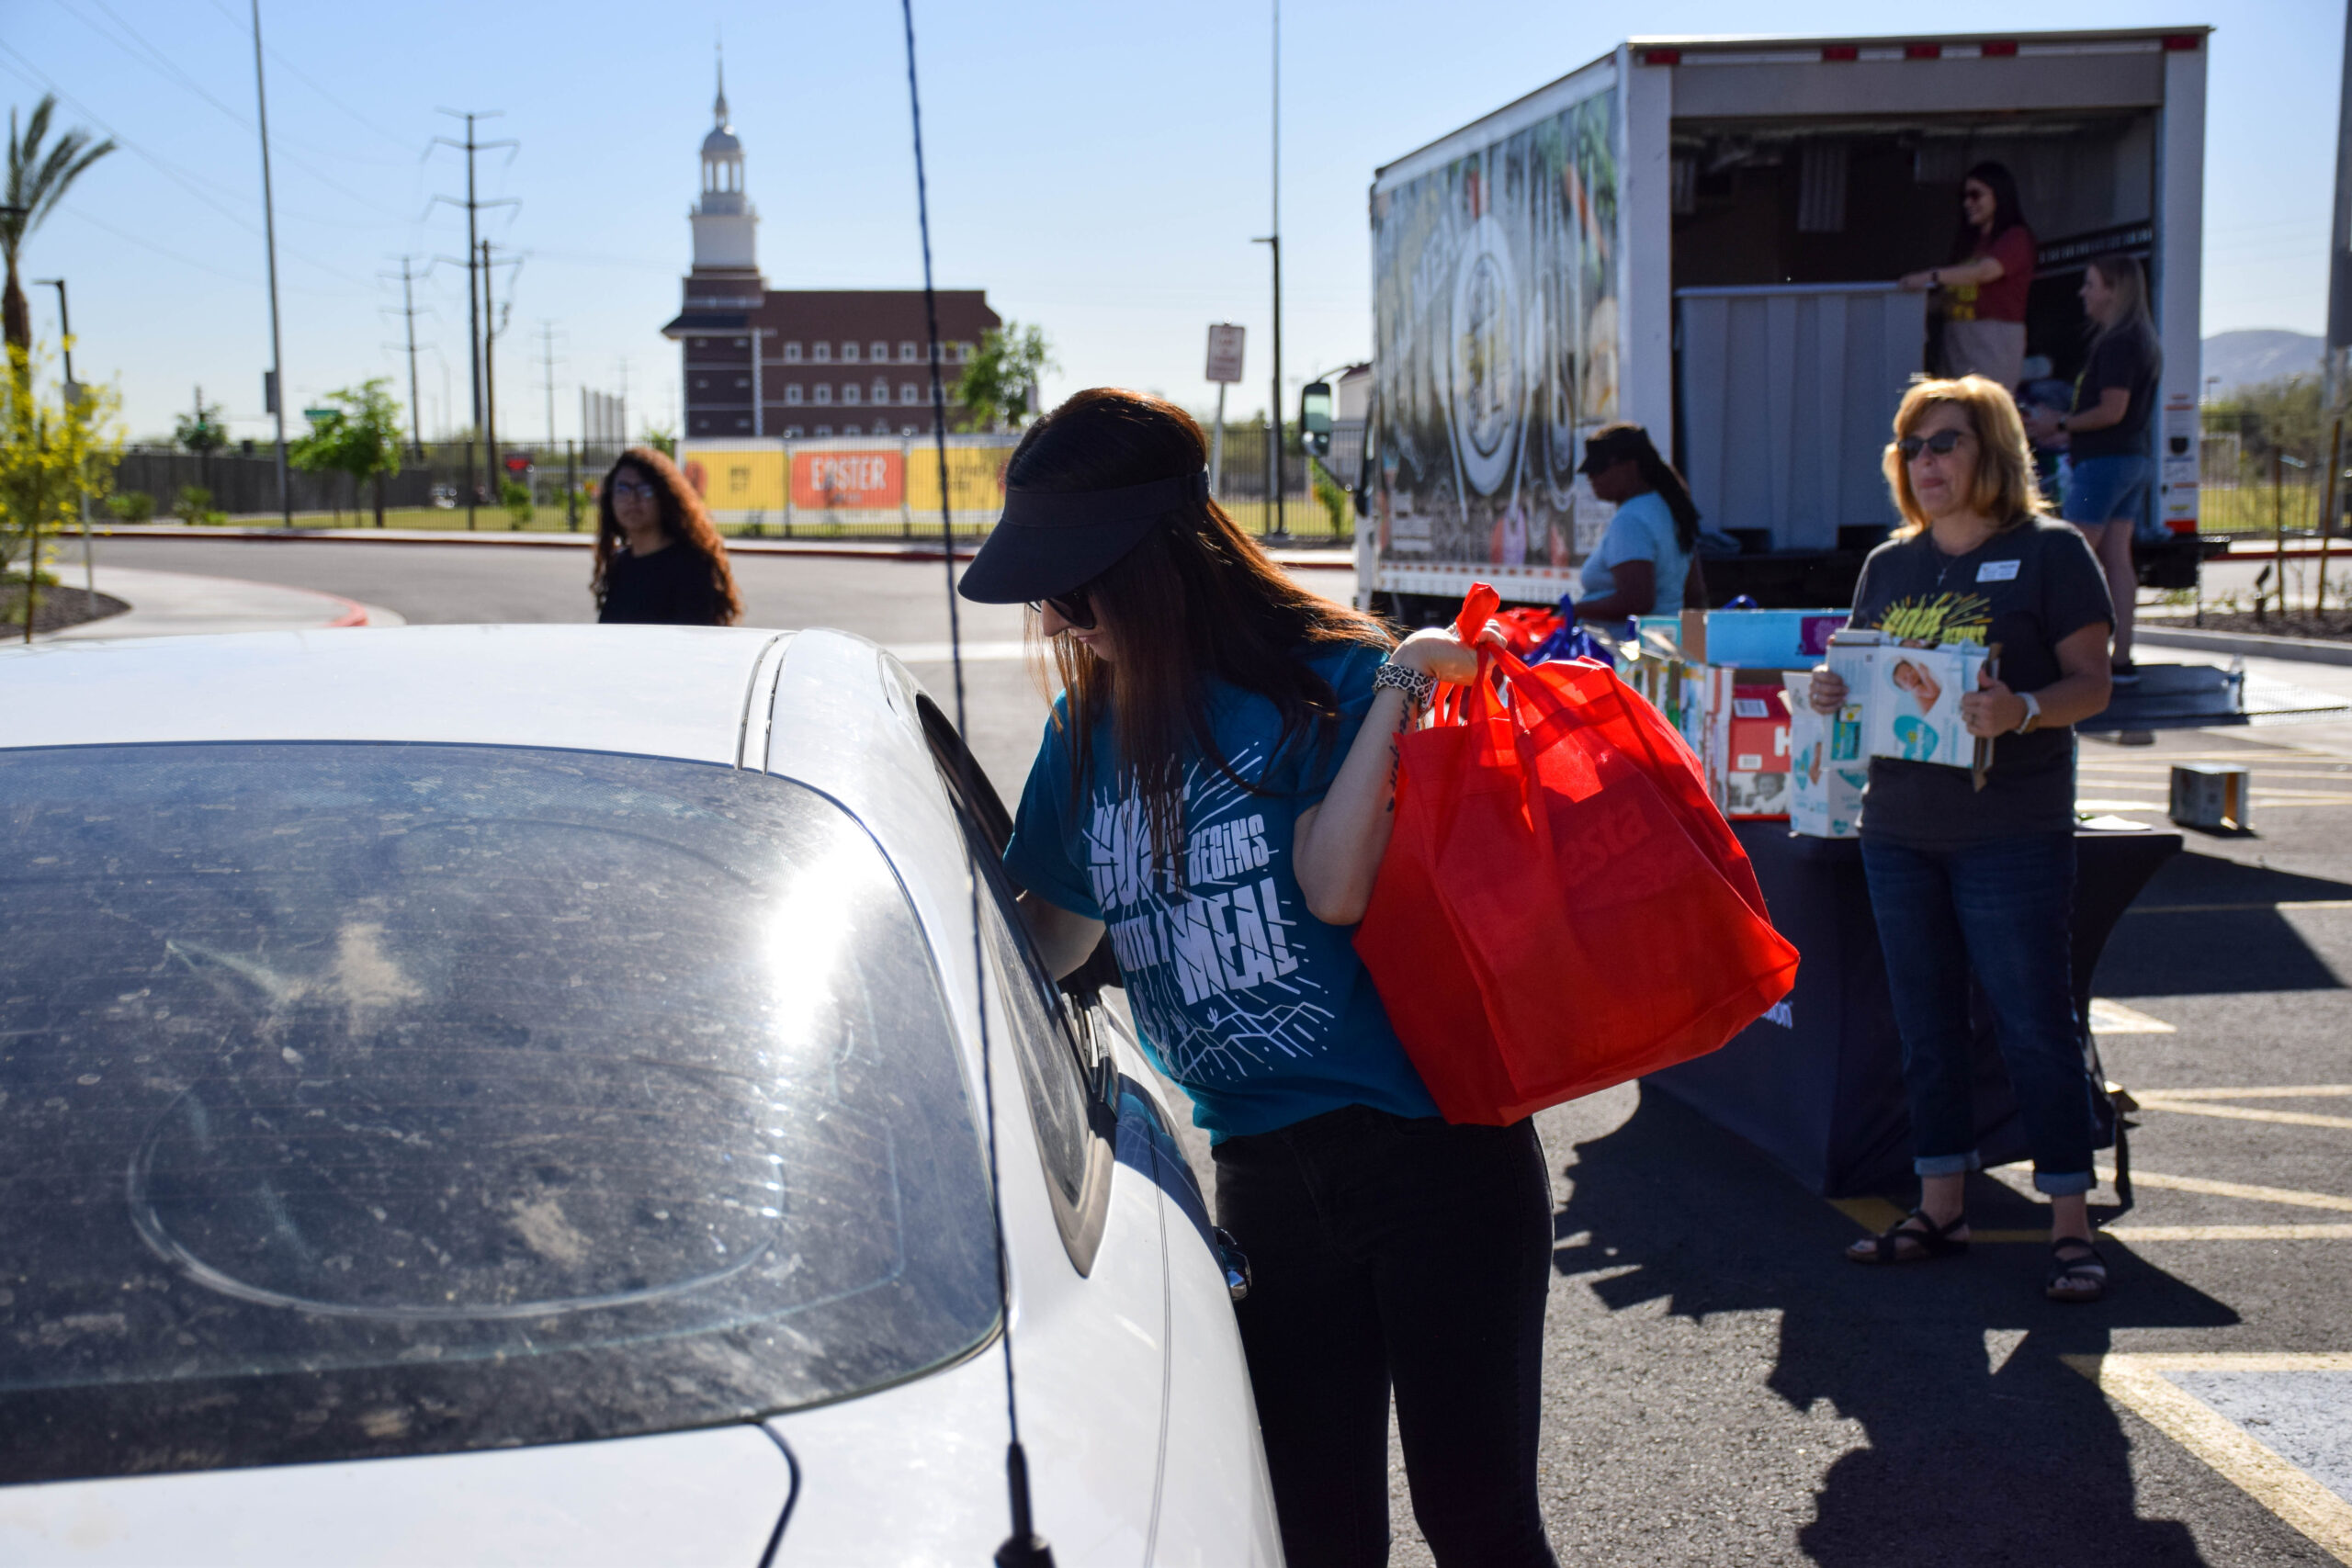 How Does a Mobile Food Pantry Work?